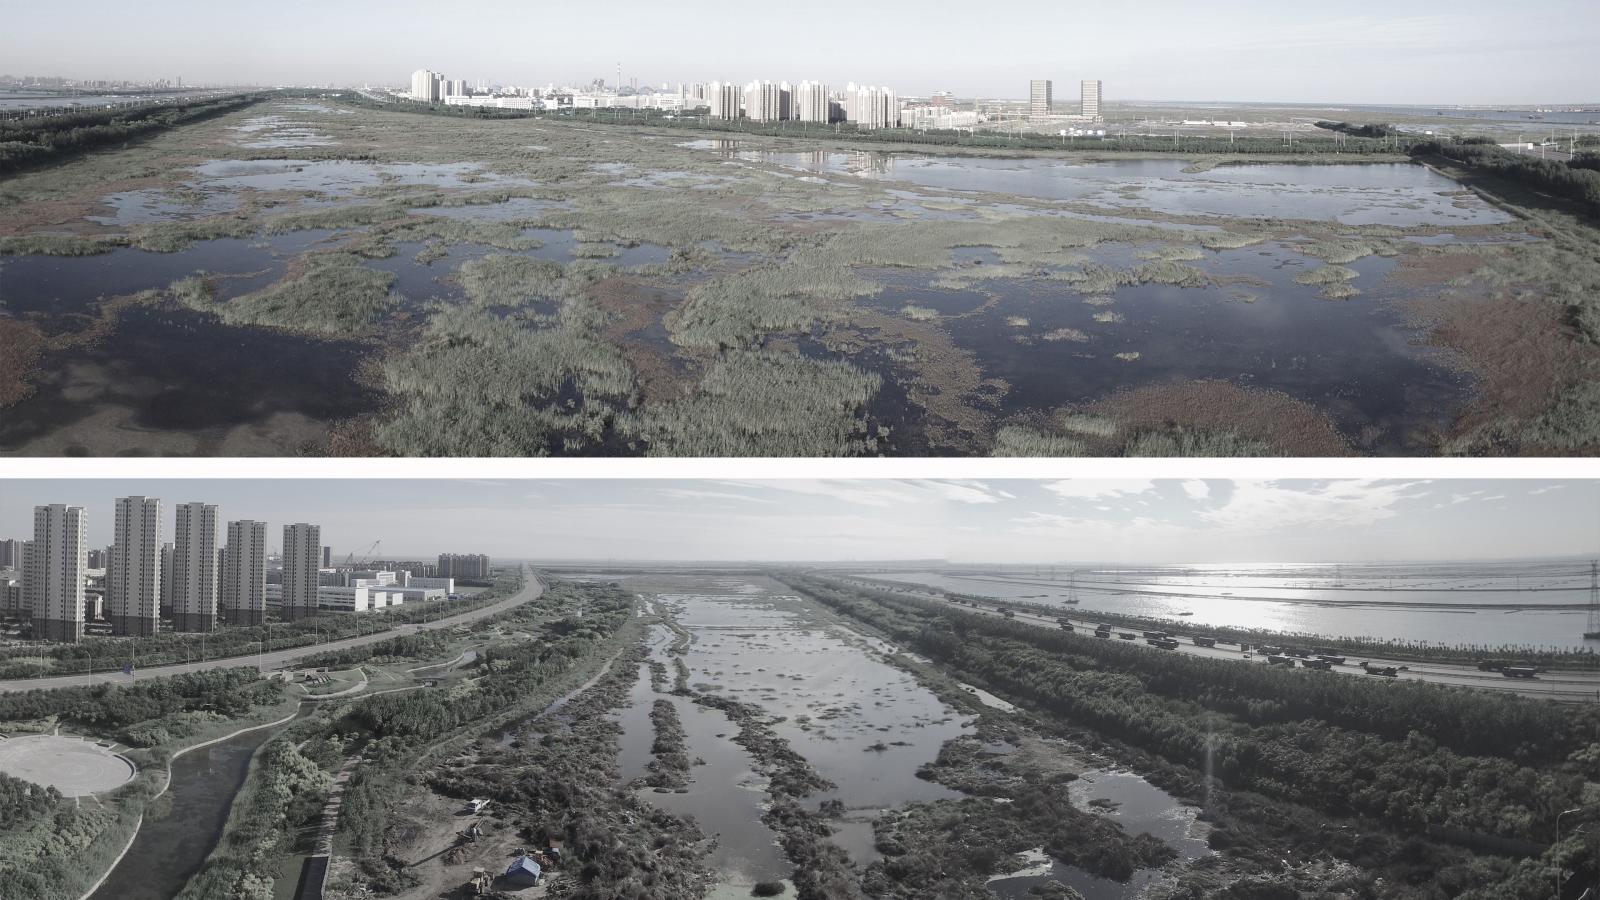 Two panoramic aerial images show a large wetland area near Lingang, adjacent to an urban environment. The landscape is dotted with water channels and vegetation, with high-rise buildings in the background. The top image offers a closer view, and the bottom image provides a wider perspective.